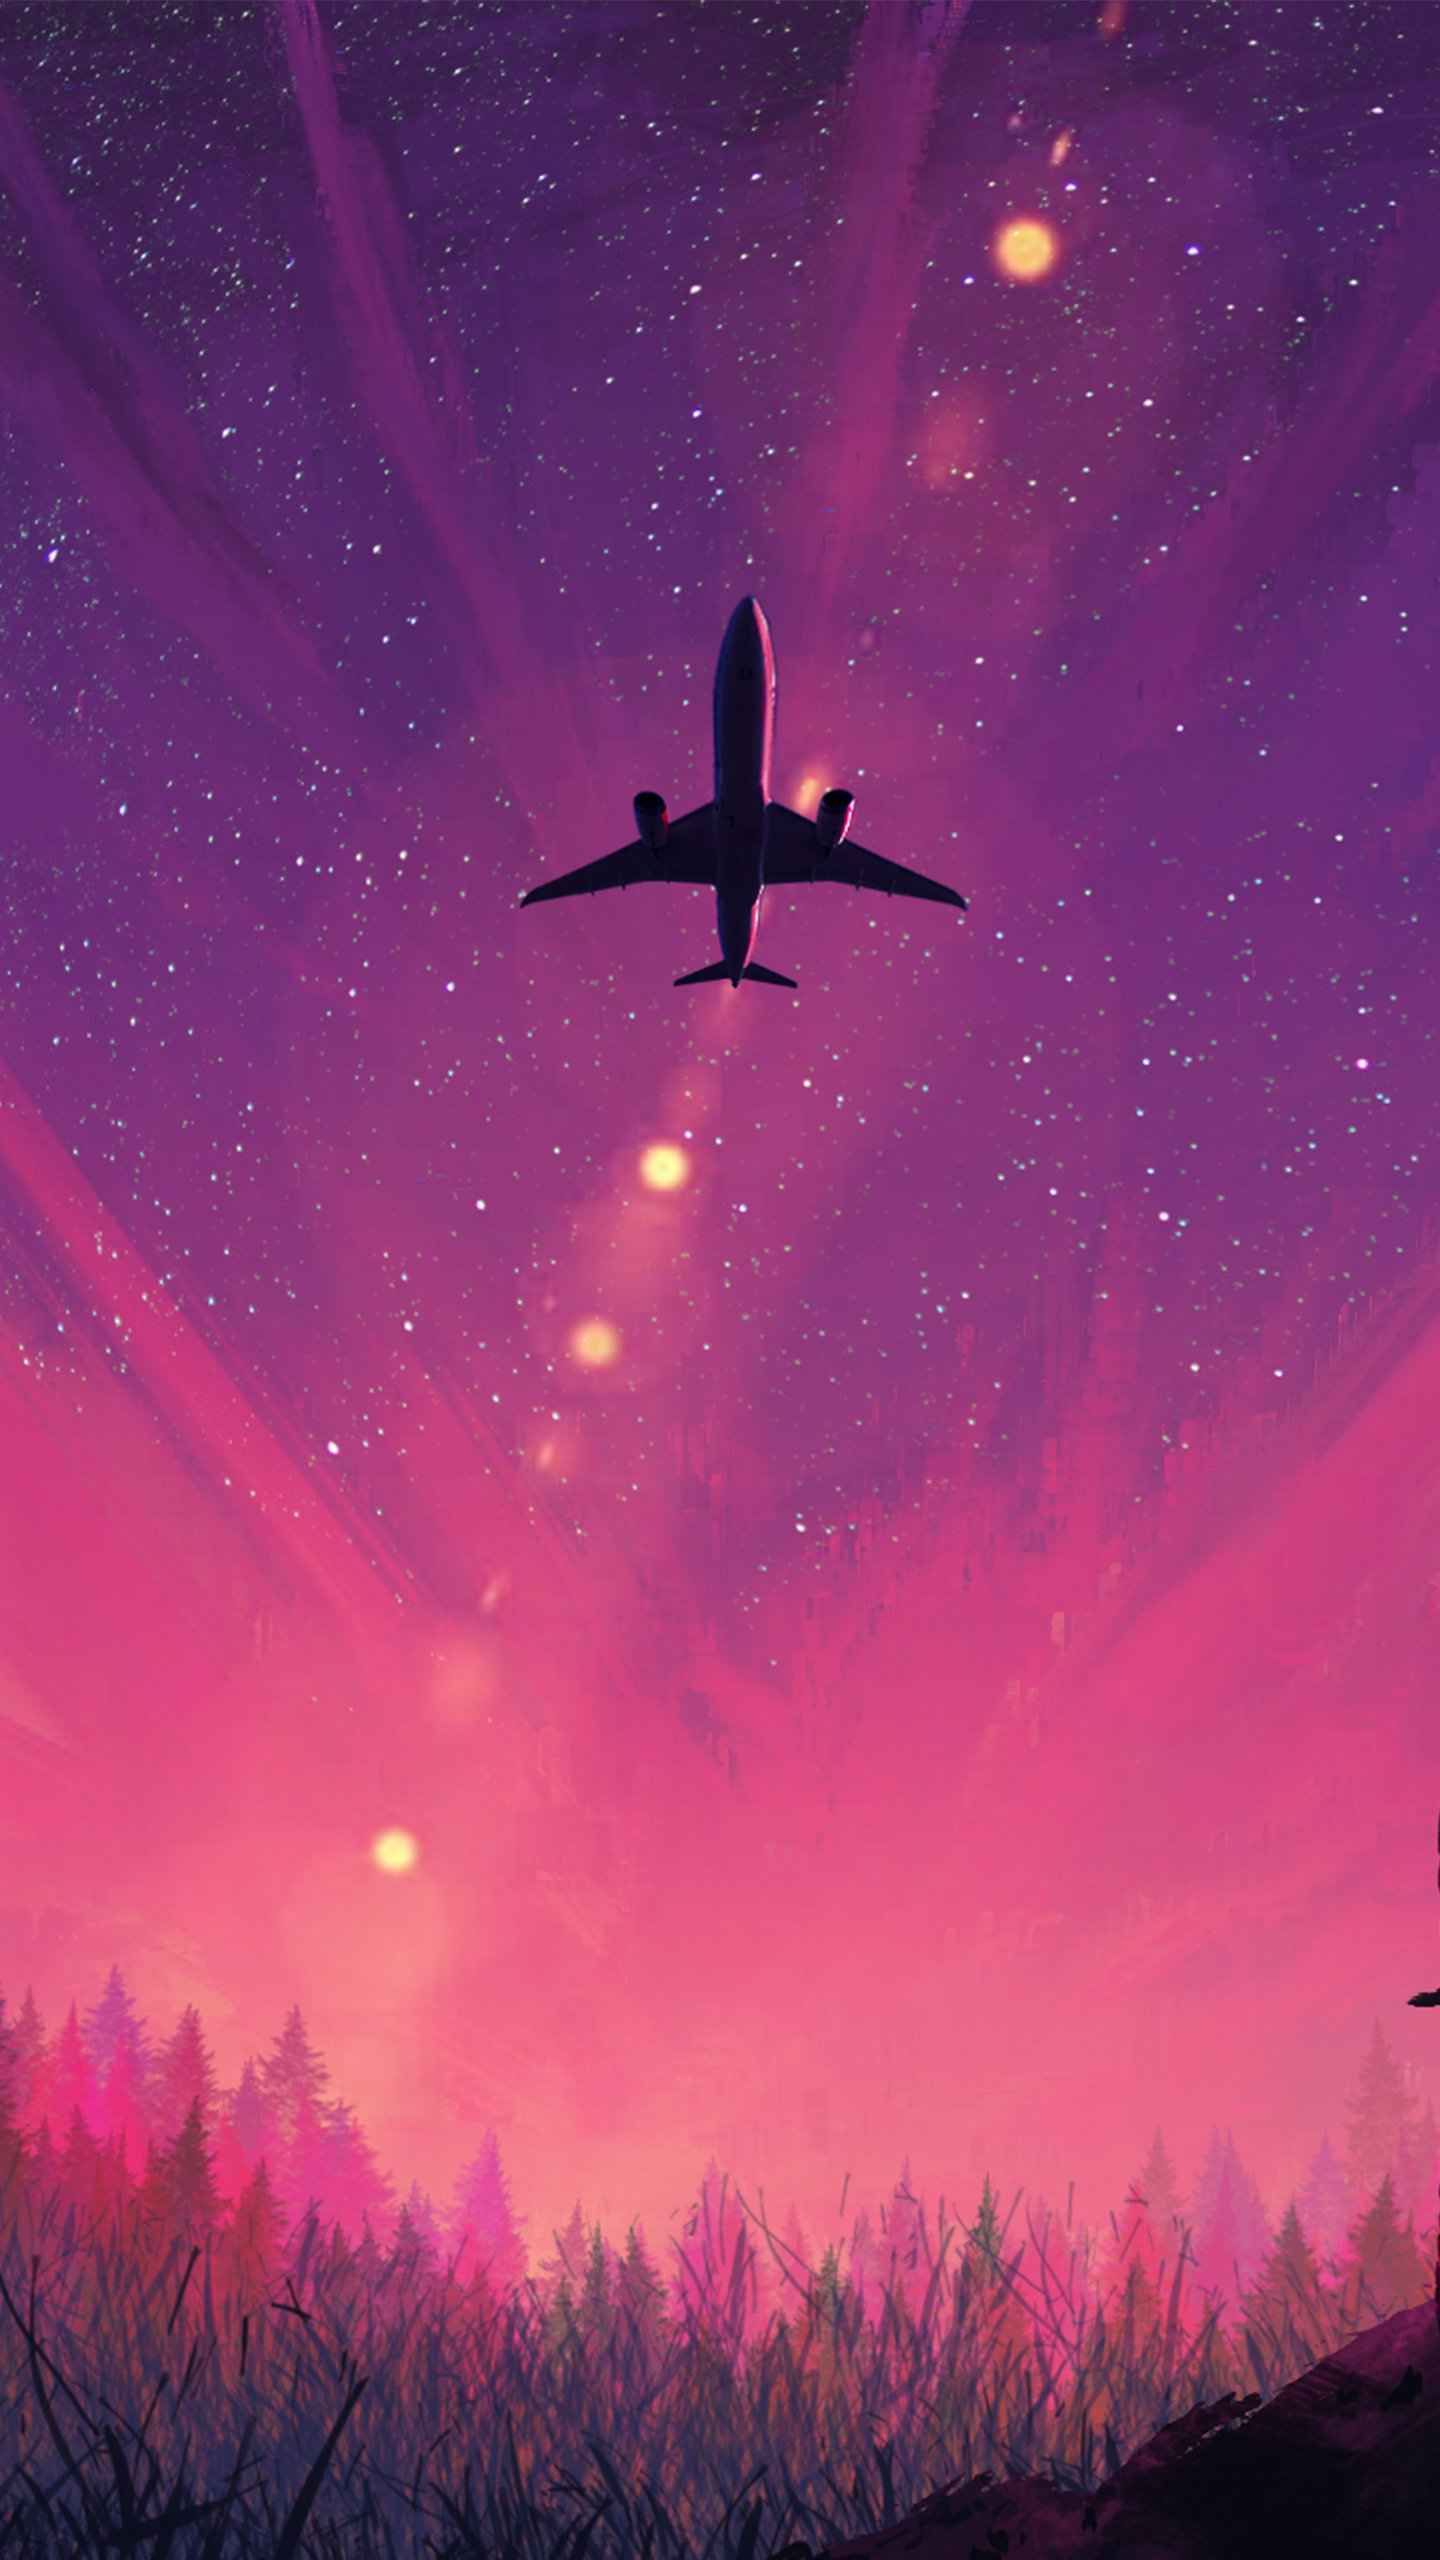 Sky Airplane IPhone Wallpaper - IPhone Wallpapers : iPhone Wallpapers